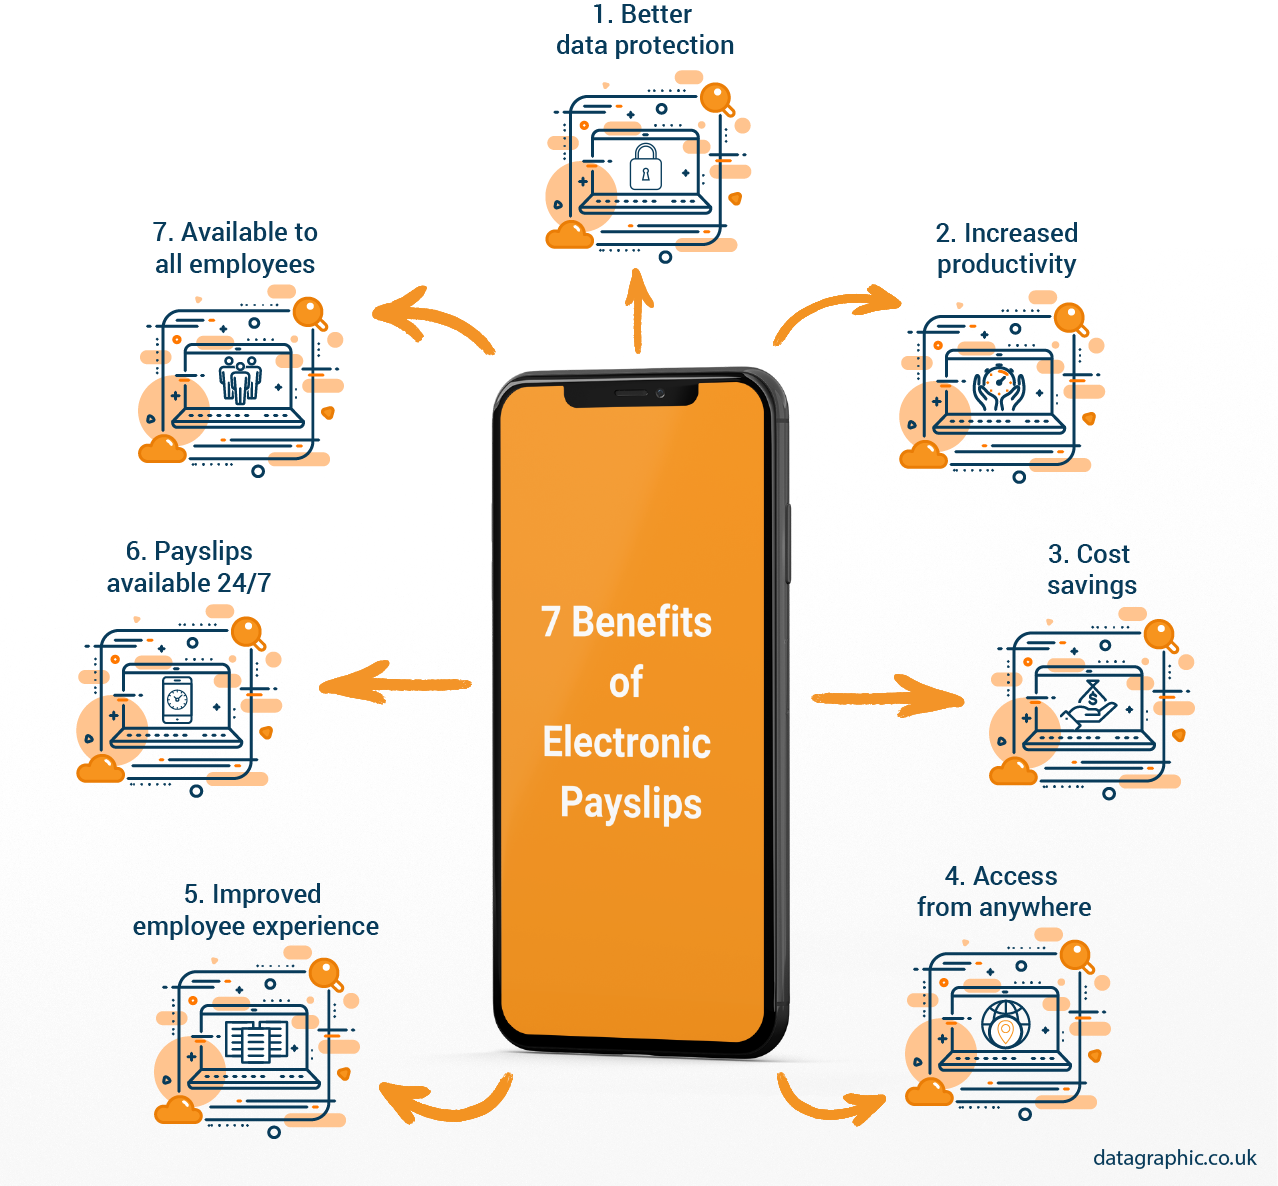 7 Benefits of Electronic Payslips Infographic